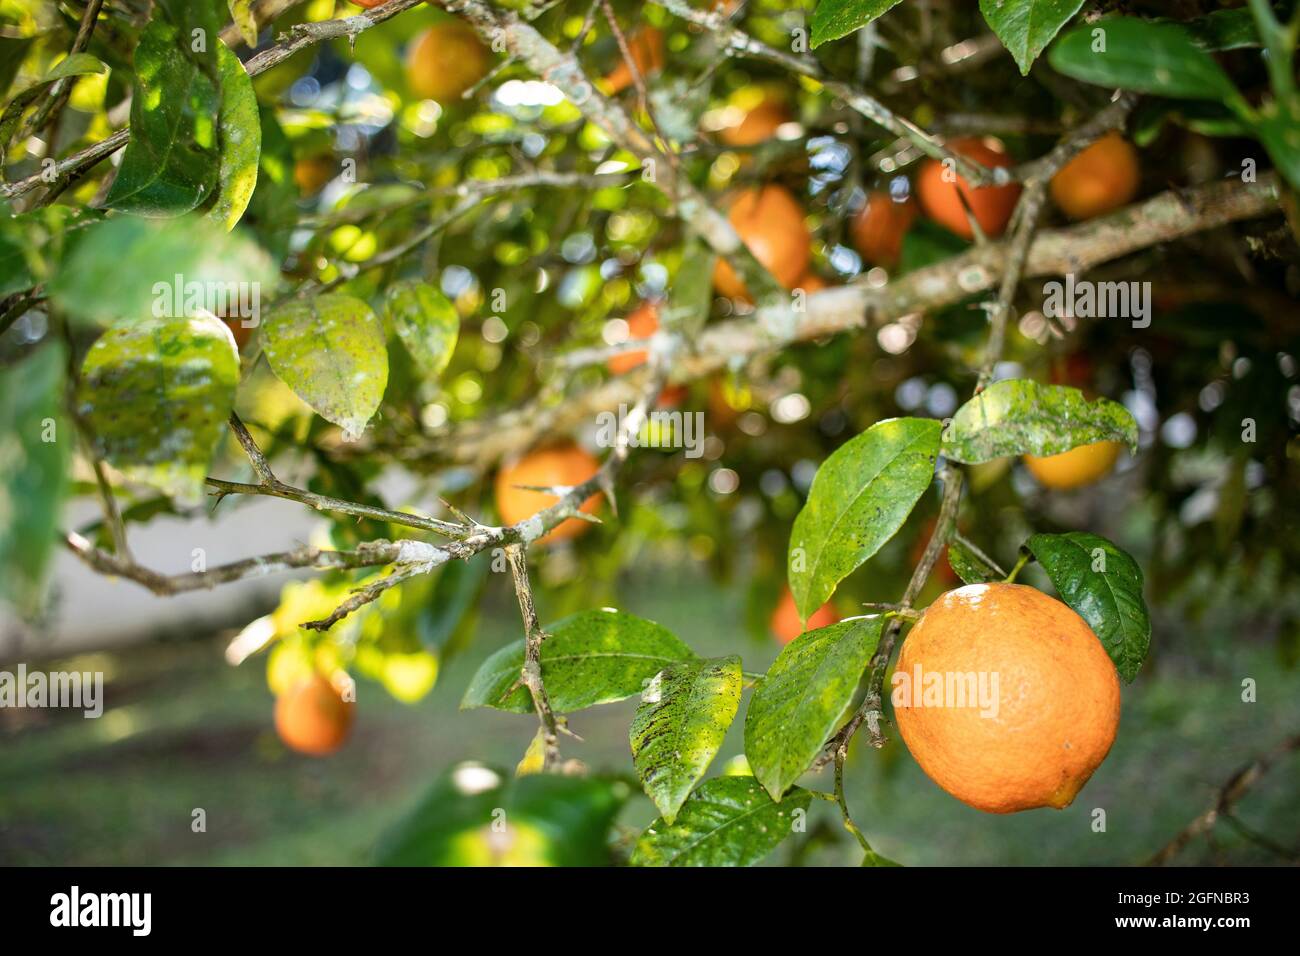 Clove lemon tree (Citrus bigaradia) with fruit on the foot, in the background other lemons and tree branches Stock Photo